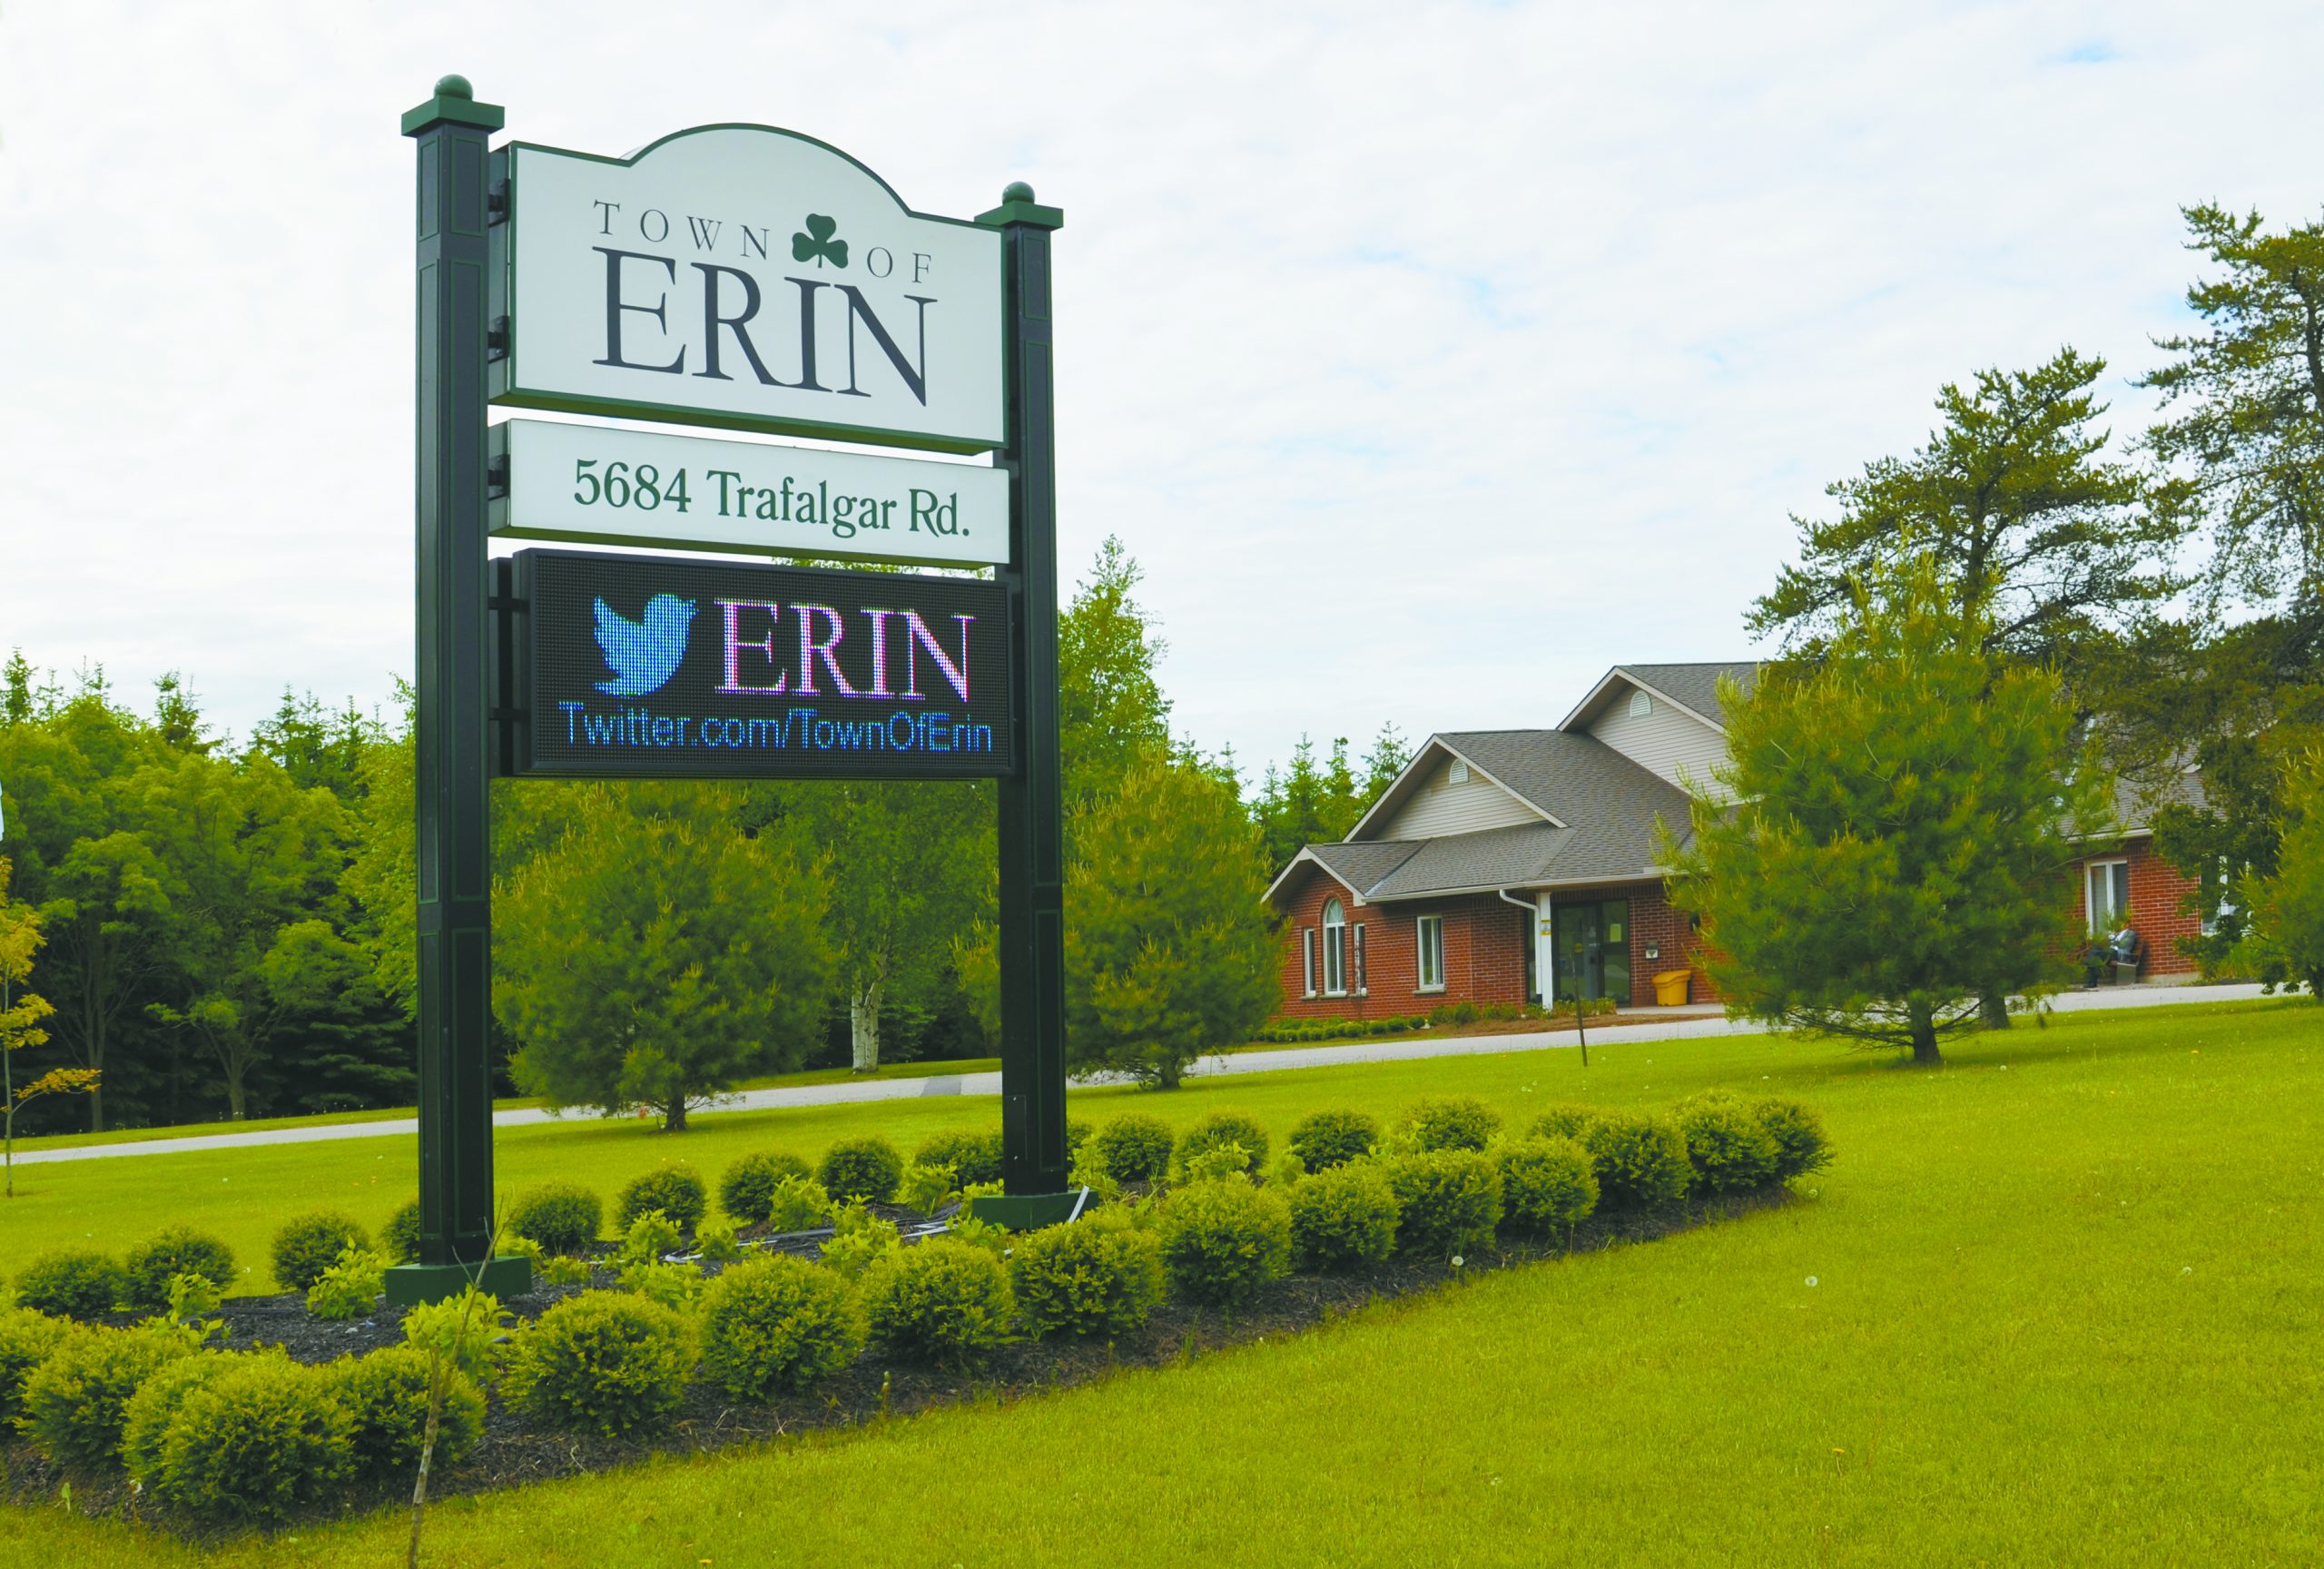 Town of Erin reconsidering allowing cannabis stores